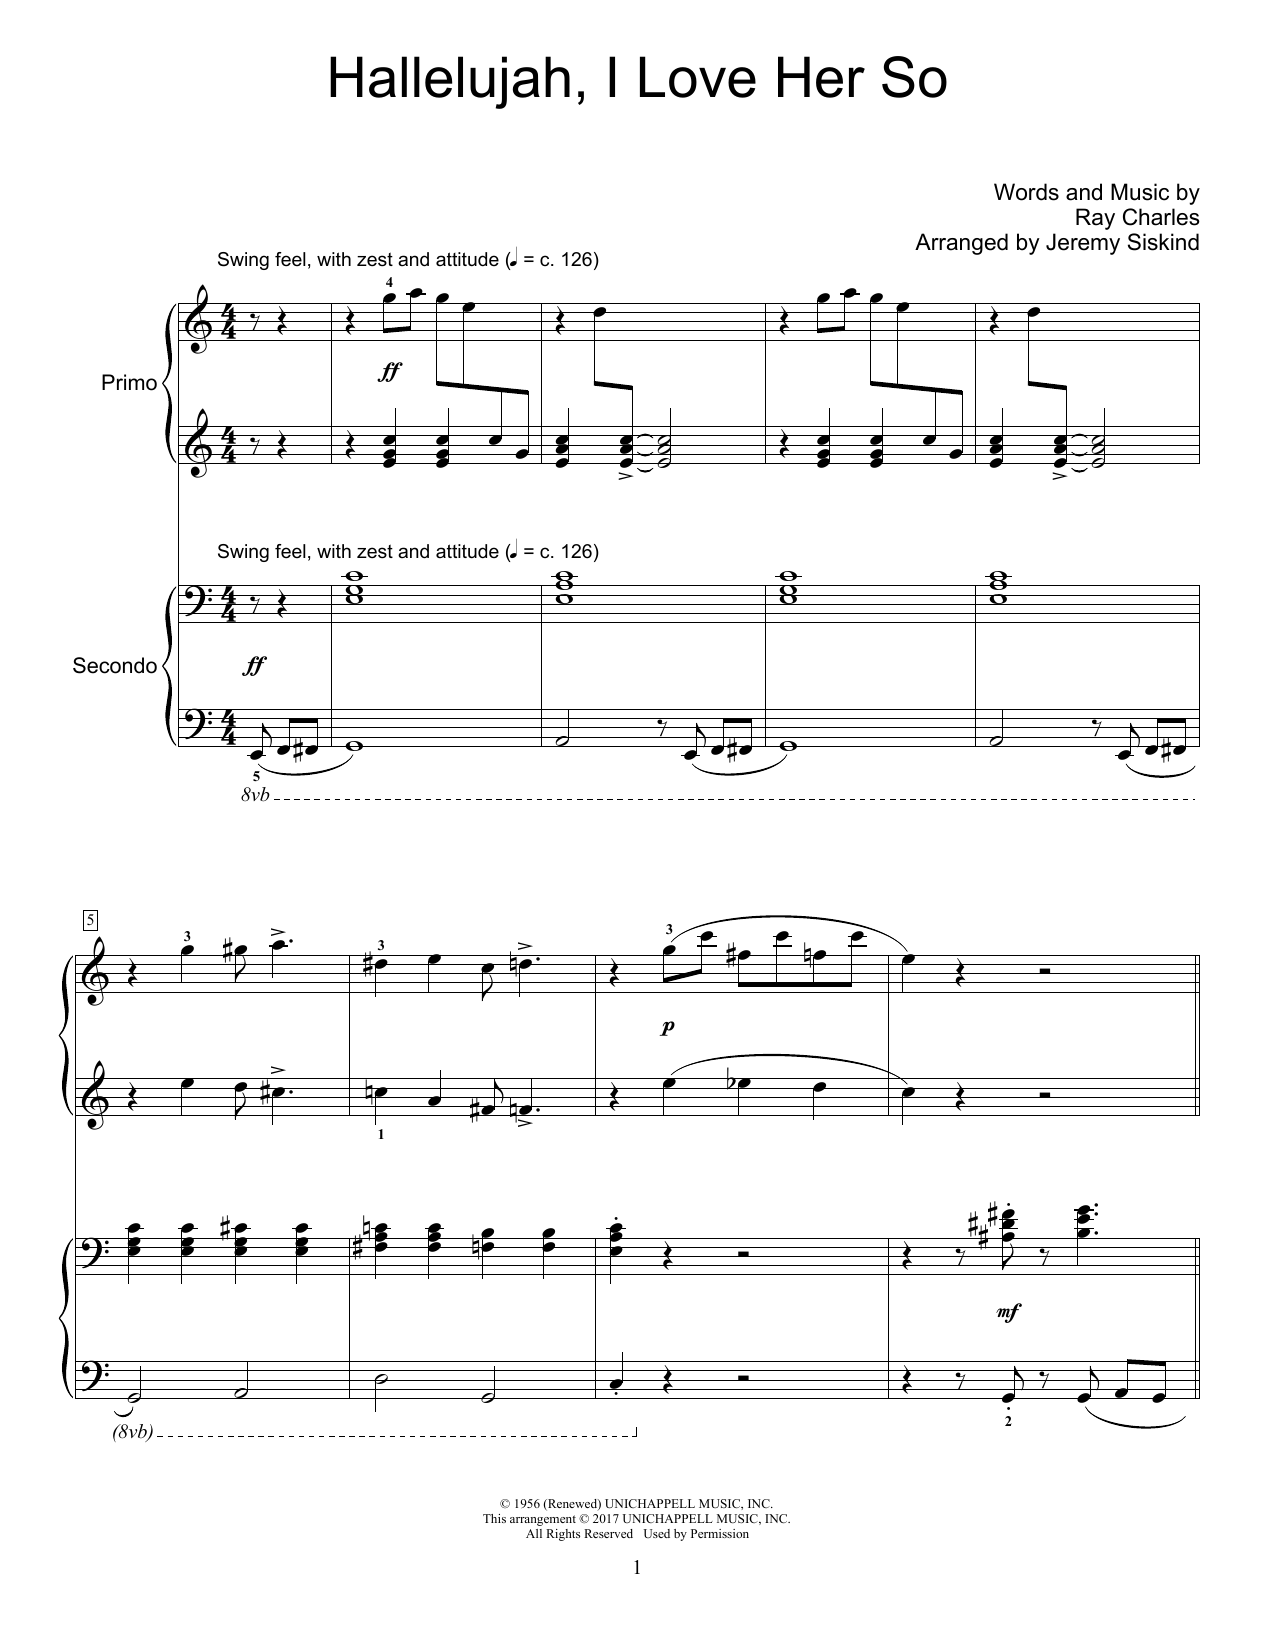 Download Ray Charles Hallelujah, I Love Her So Sheet Music